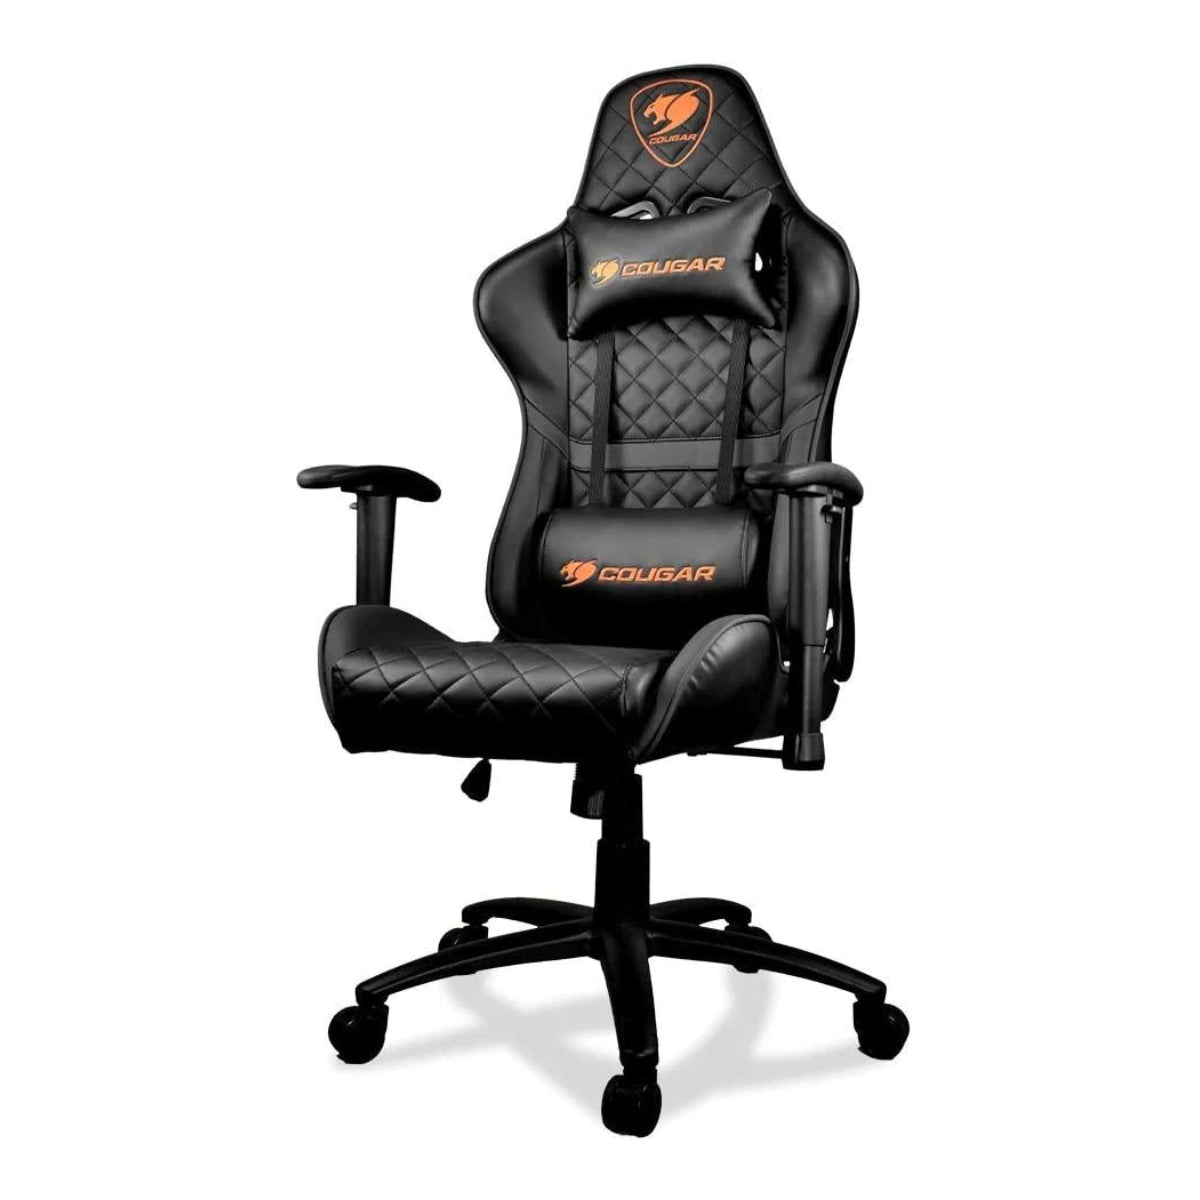 Cougar Armor One Gaming Chair - Black - Store 974 | ستور ٩٧٤